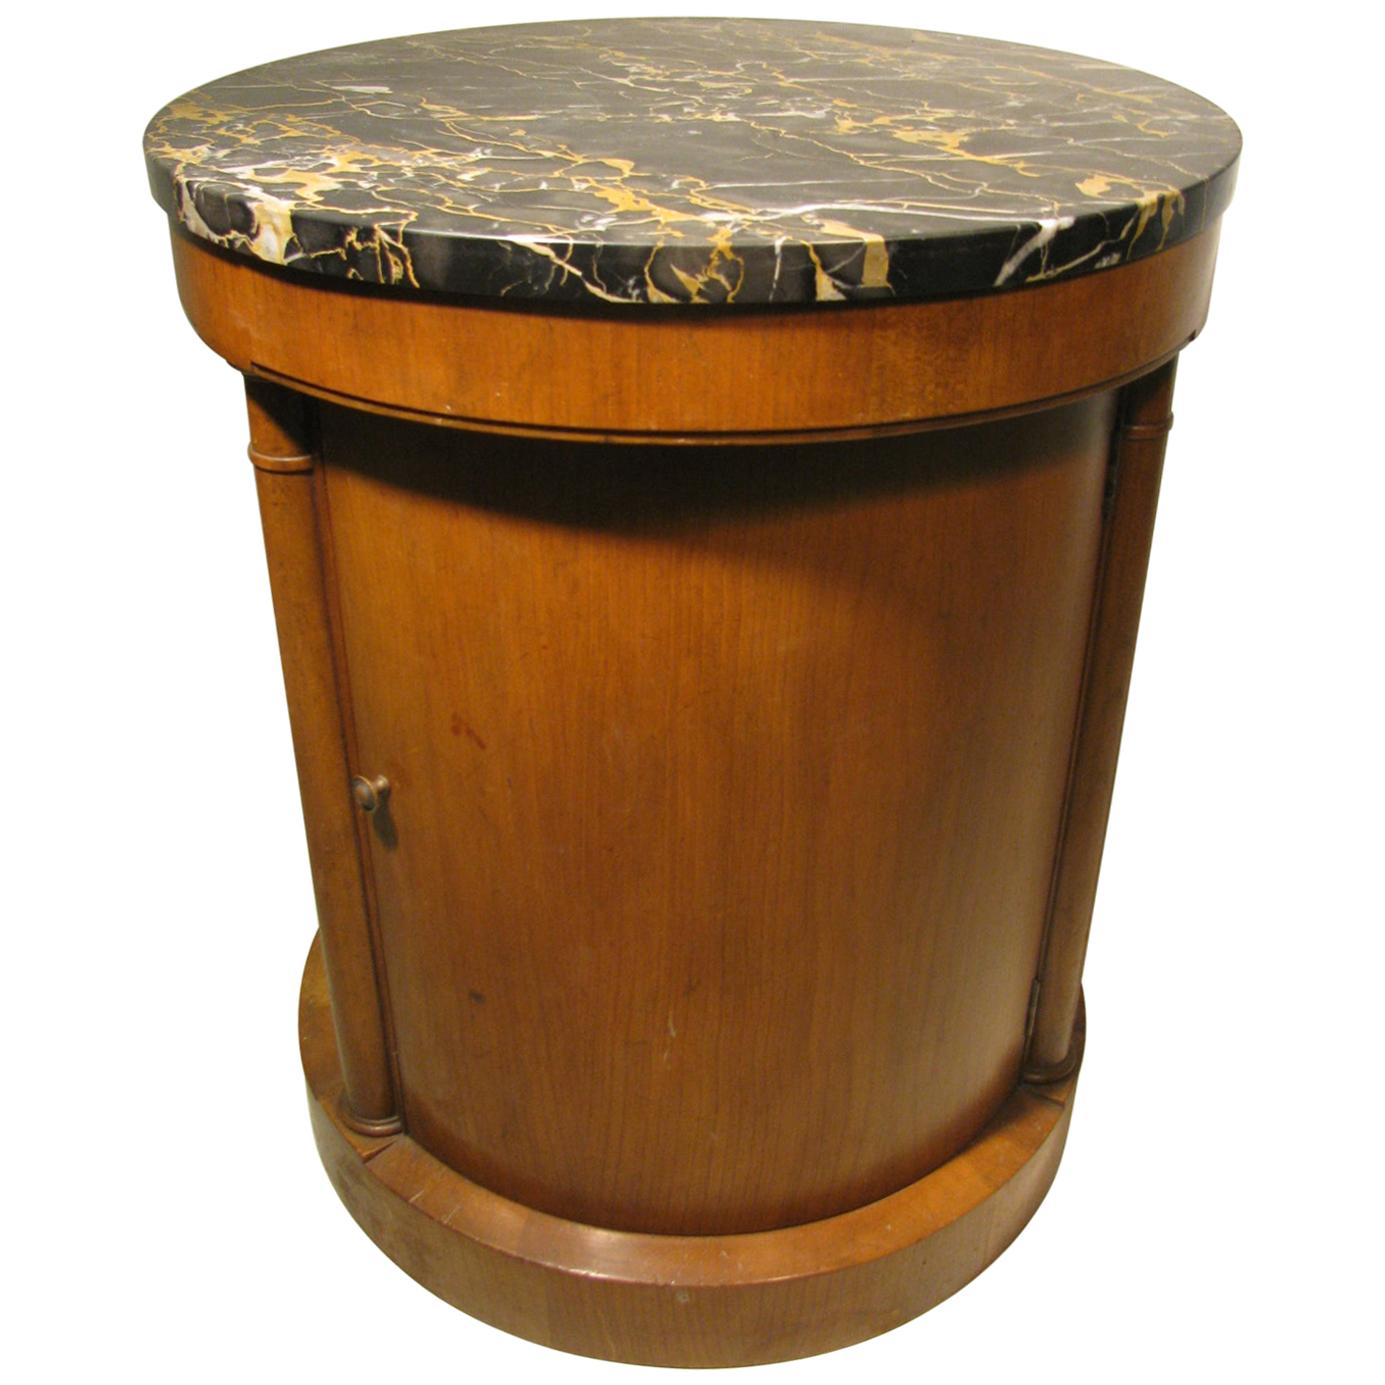 Neoclassical Marble Top Round Side Table Bar Cabinet Baker Furniture